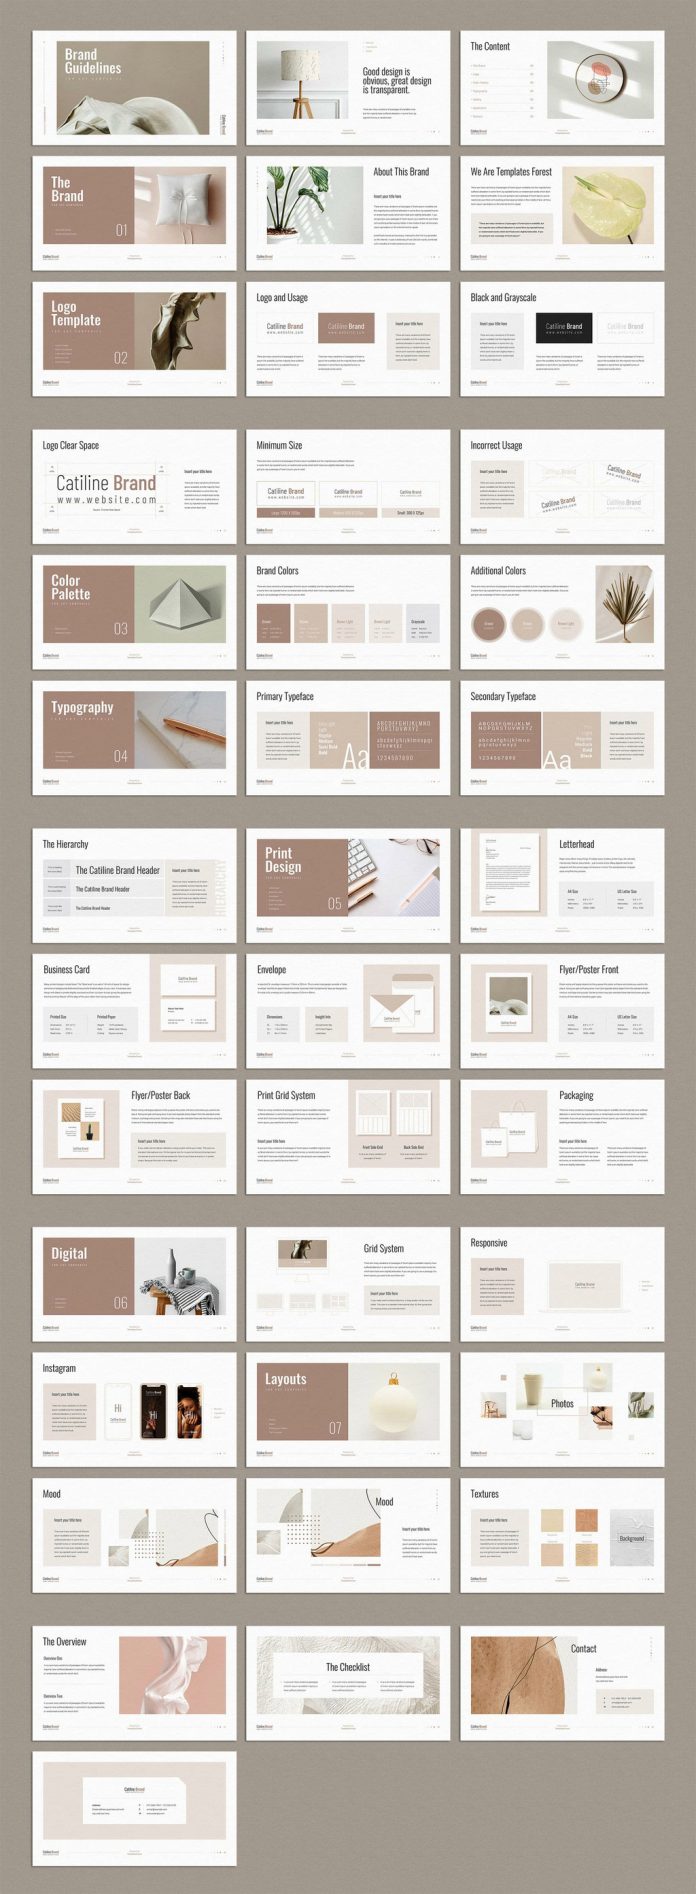 1920 x 1080px Brand Guidelines Presentation Template for Adobe InDesign